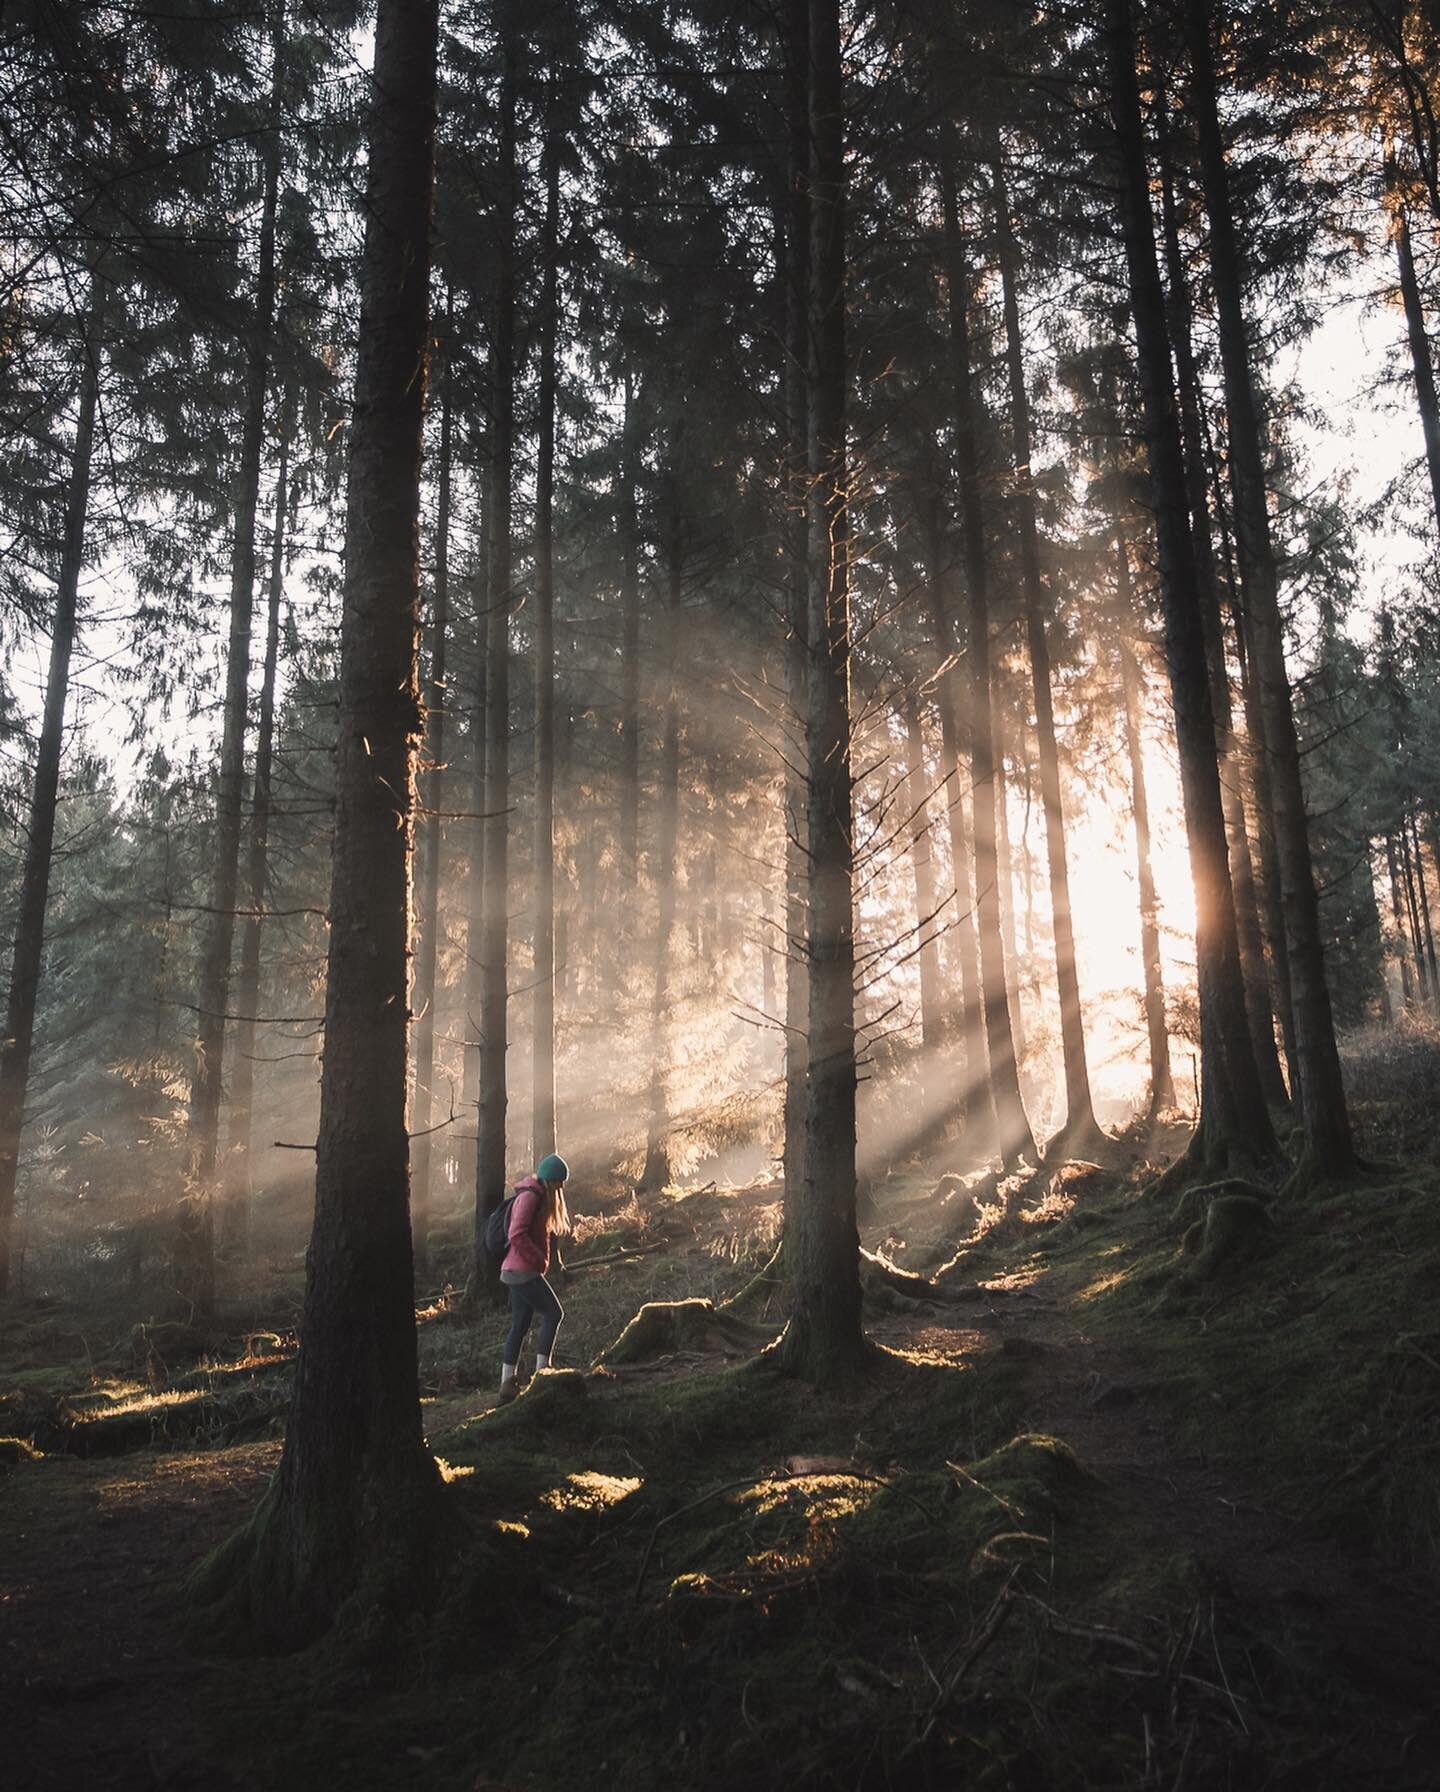 ↟ To quote one of my favourite films... The morning when we went exploring in the woods was simply &lsquo;majestical&rsquo;. Anyone know which film I&rsquo;m referring to? 

There&rsquo;s an amazing feeling that I experience as a photographer. It&rsq